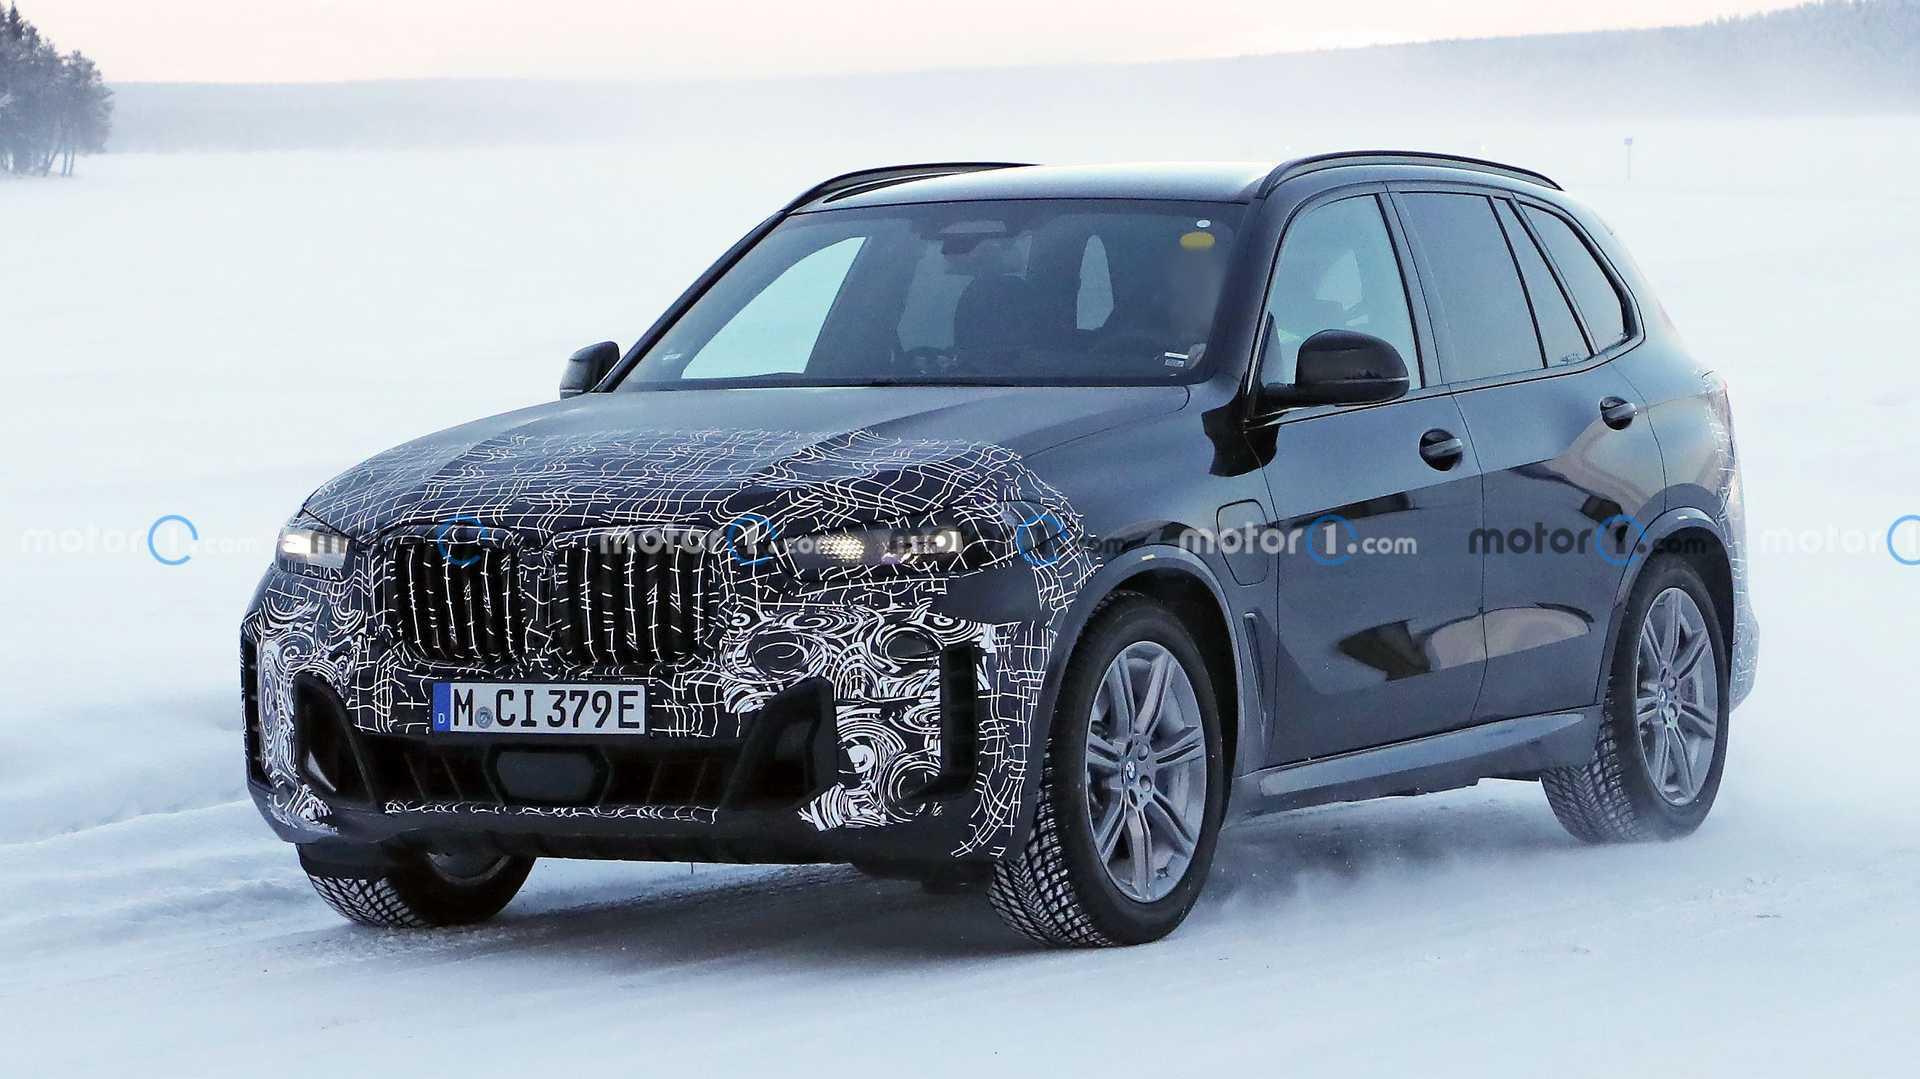 Bmw X5 Facelift To Debut In April With M60i Version